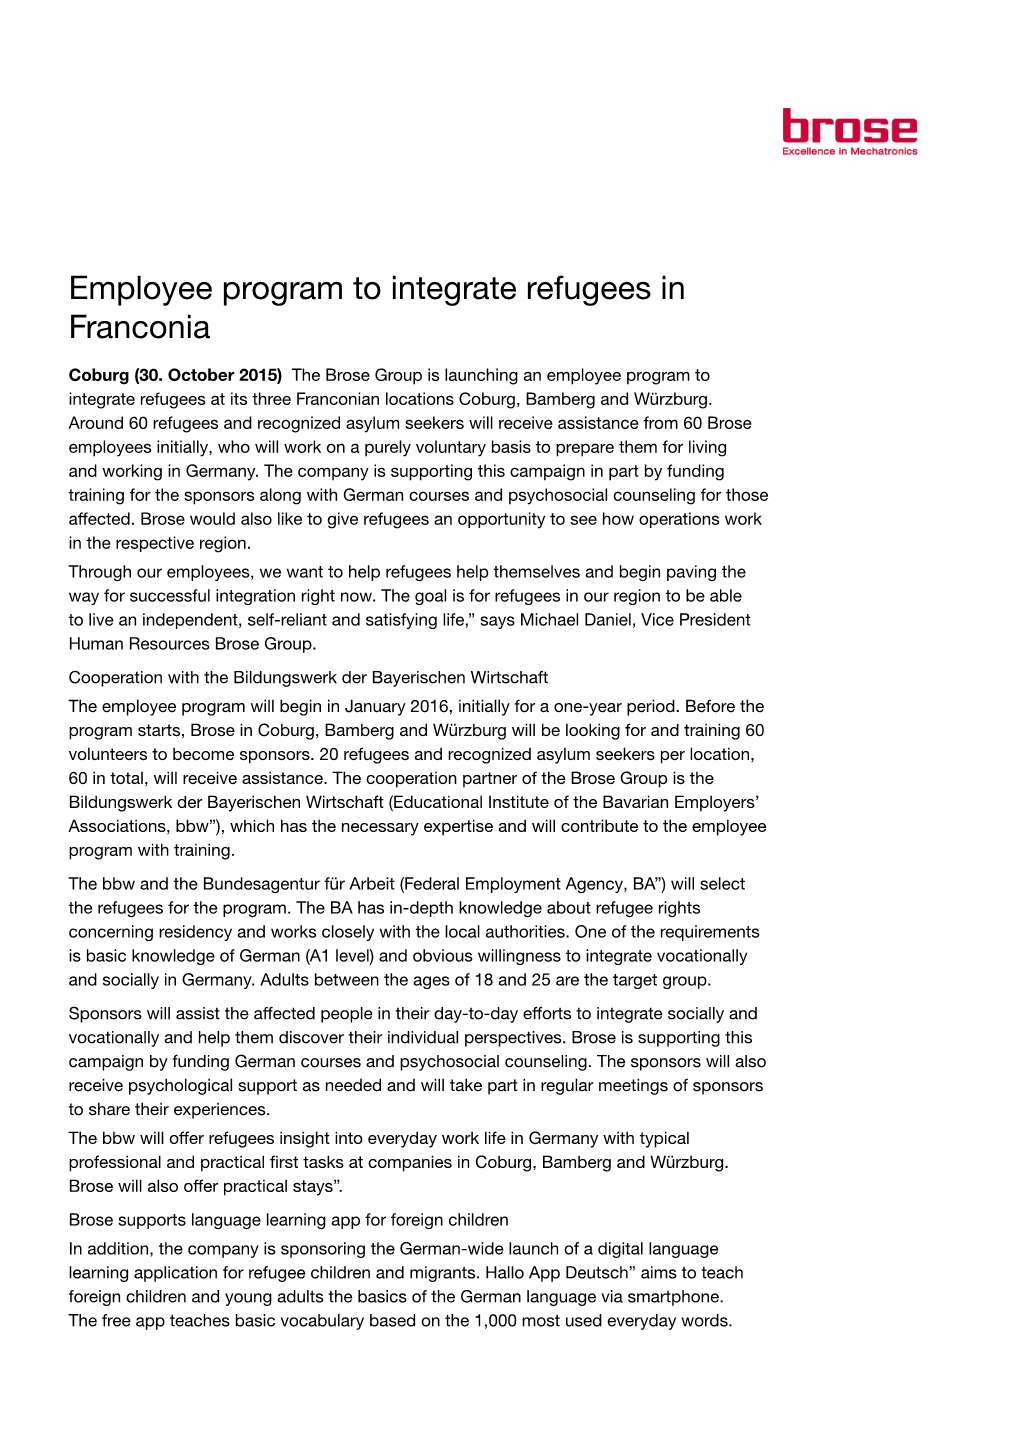 Employee Program to Integrate Refugees in Franconia